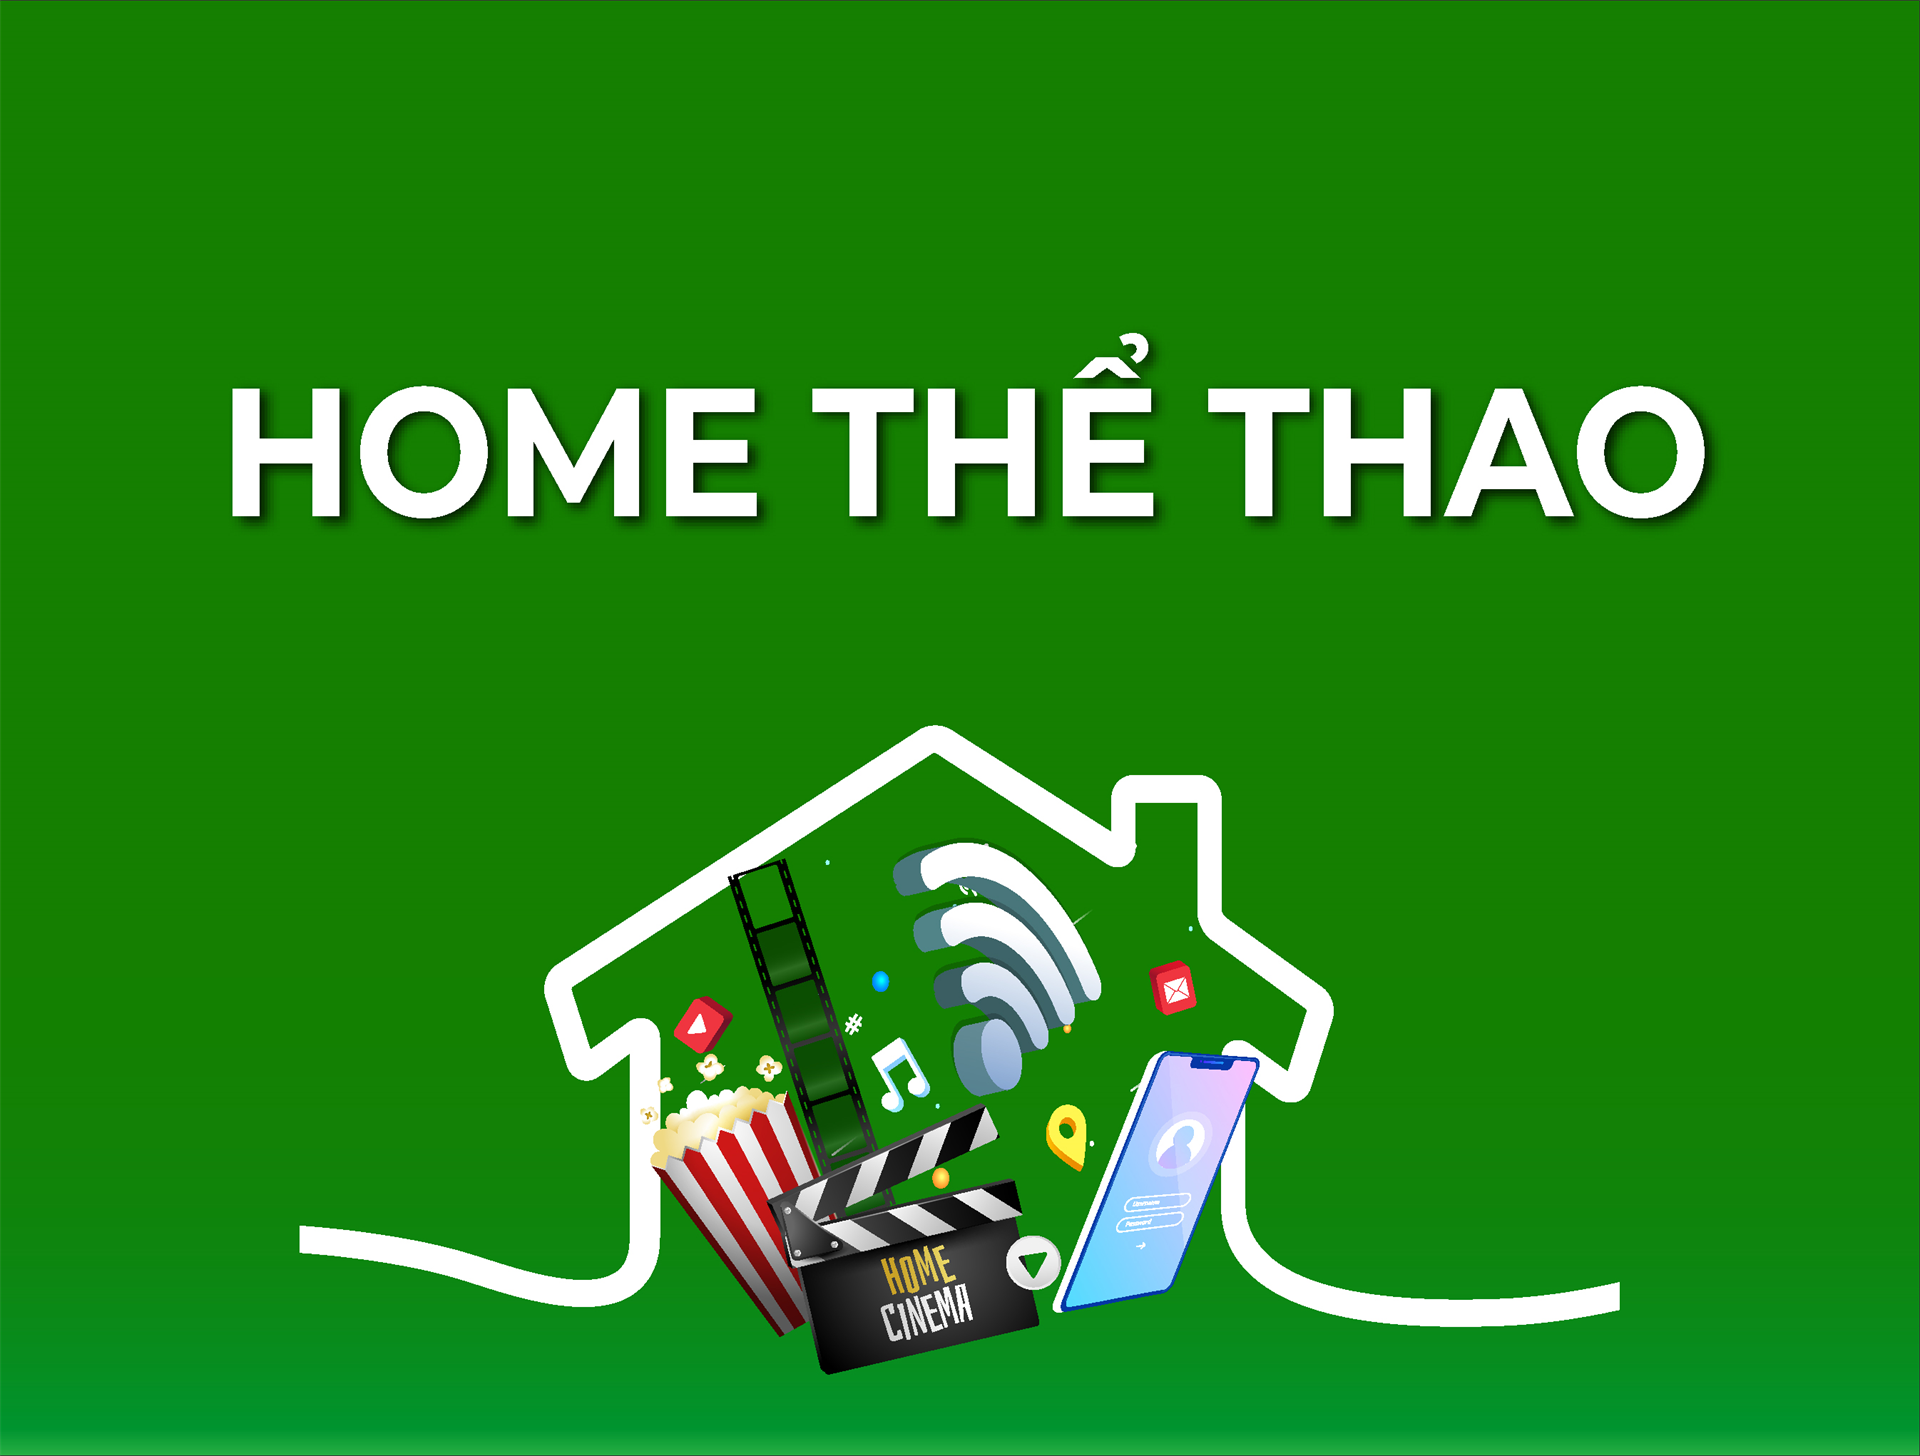 Home Thể Thao